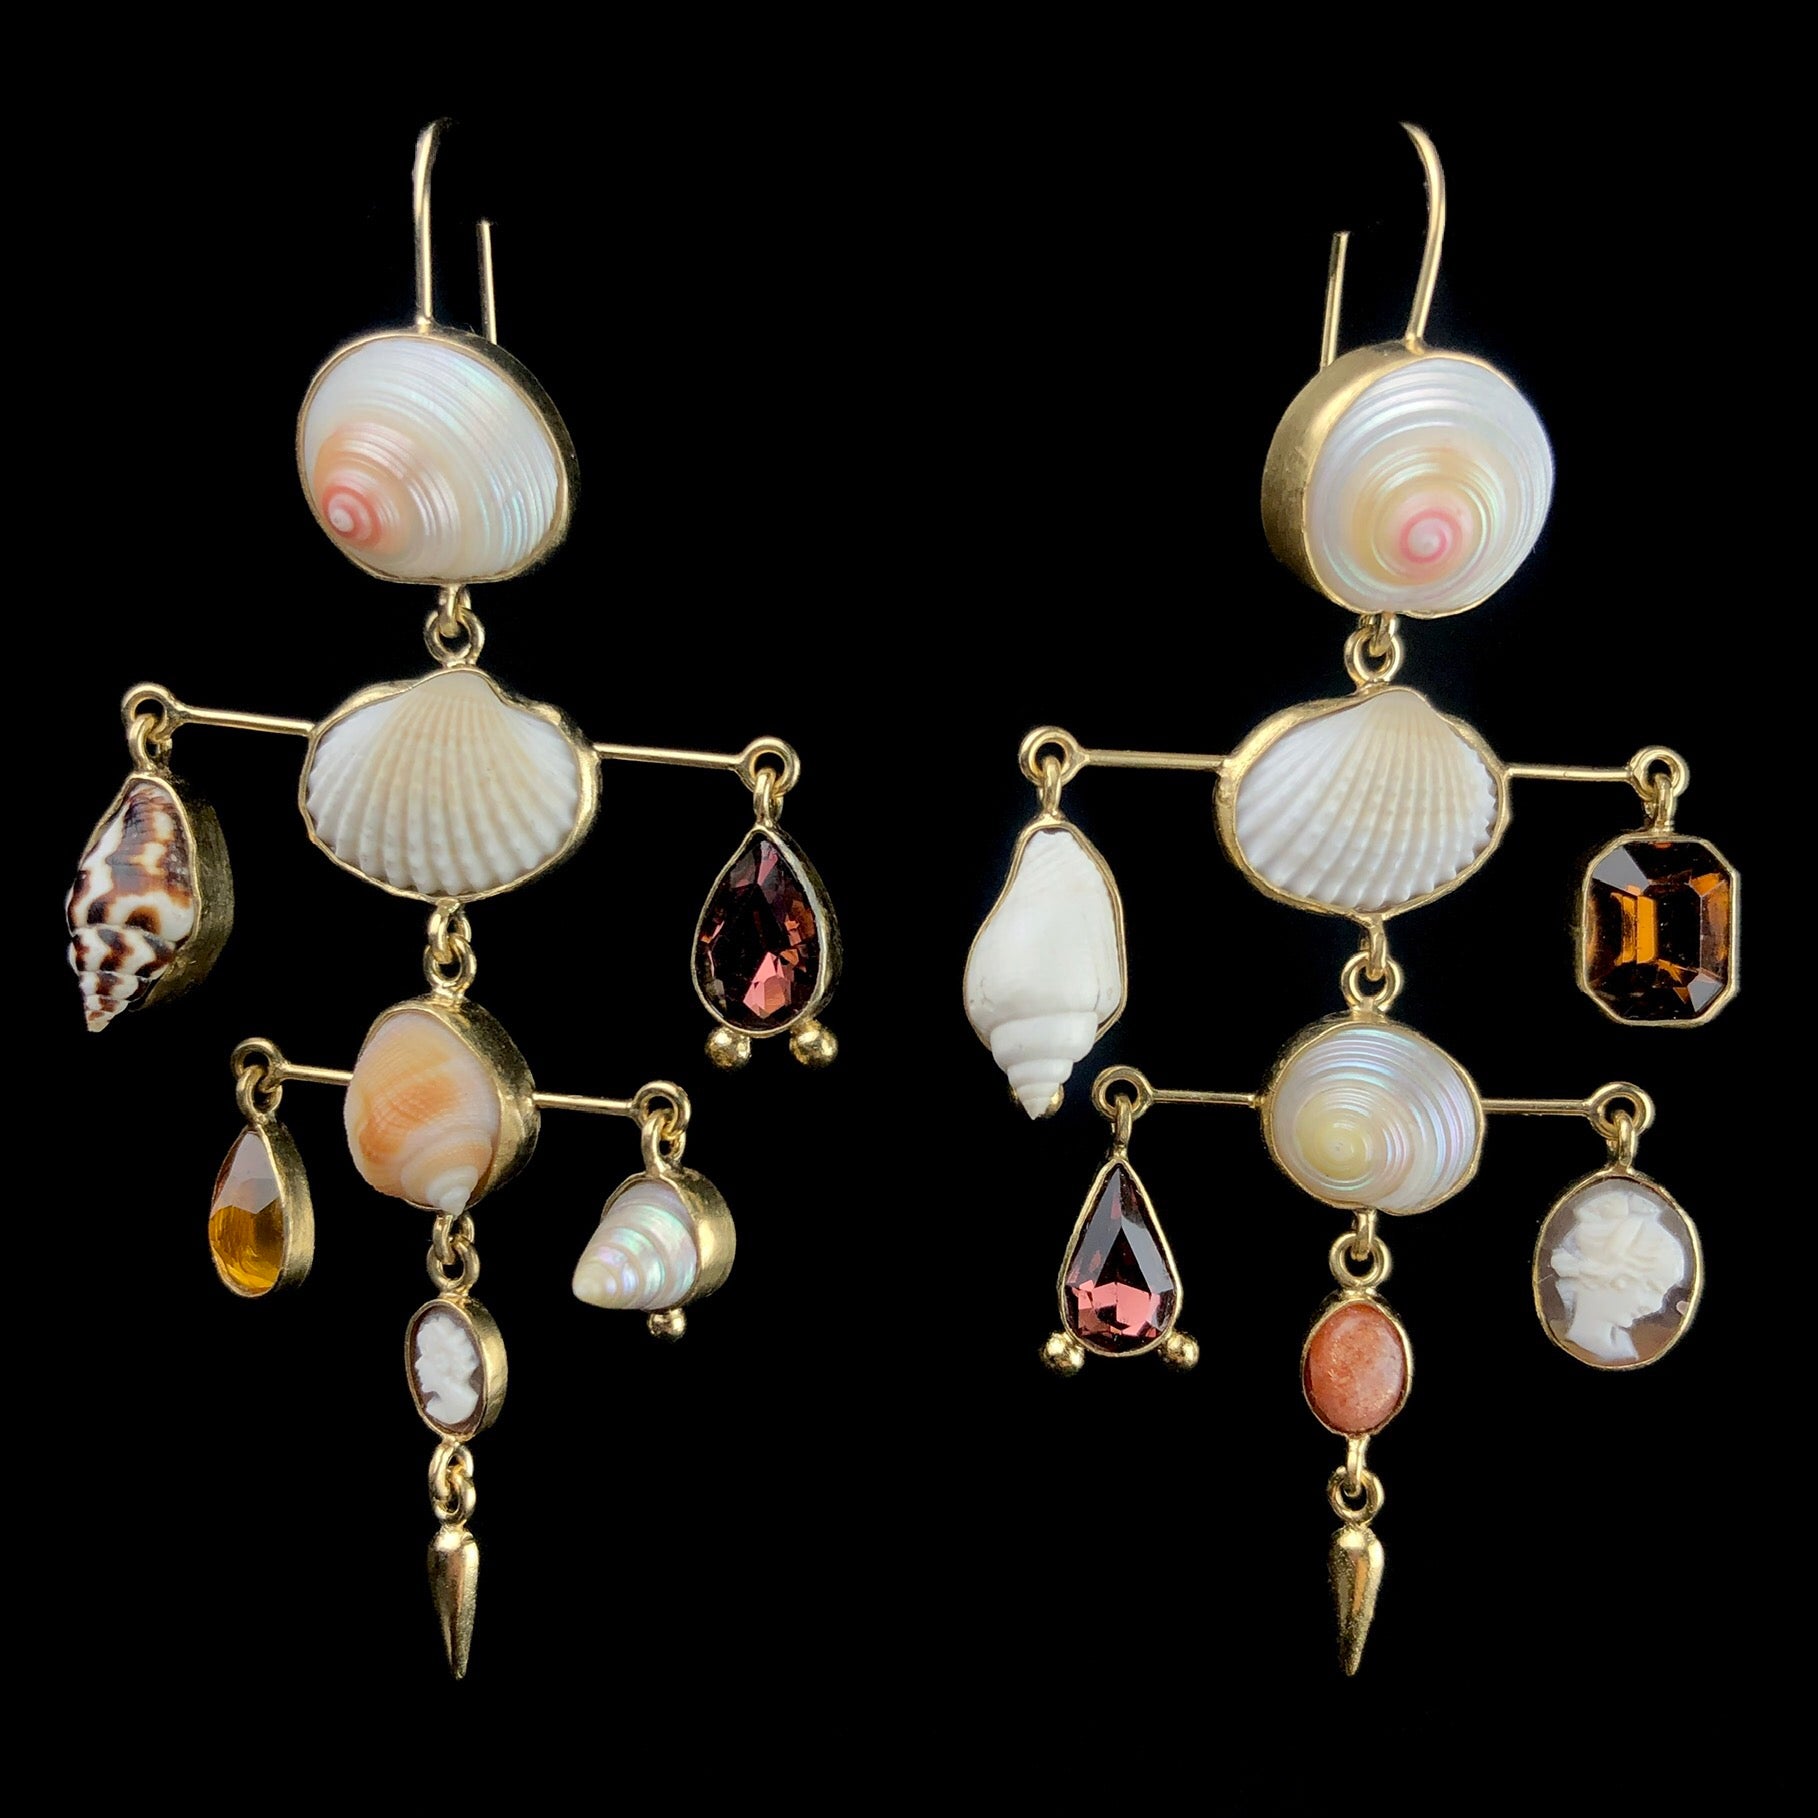 Layered Victorian Shell Earrings shown side by side